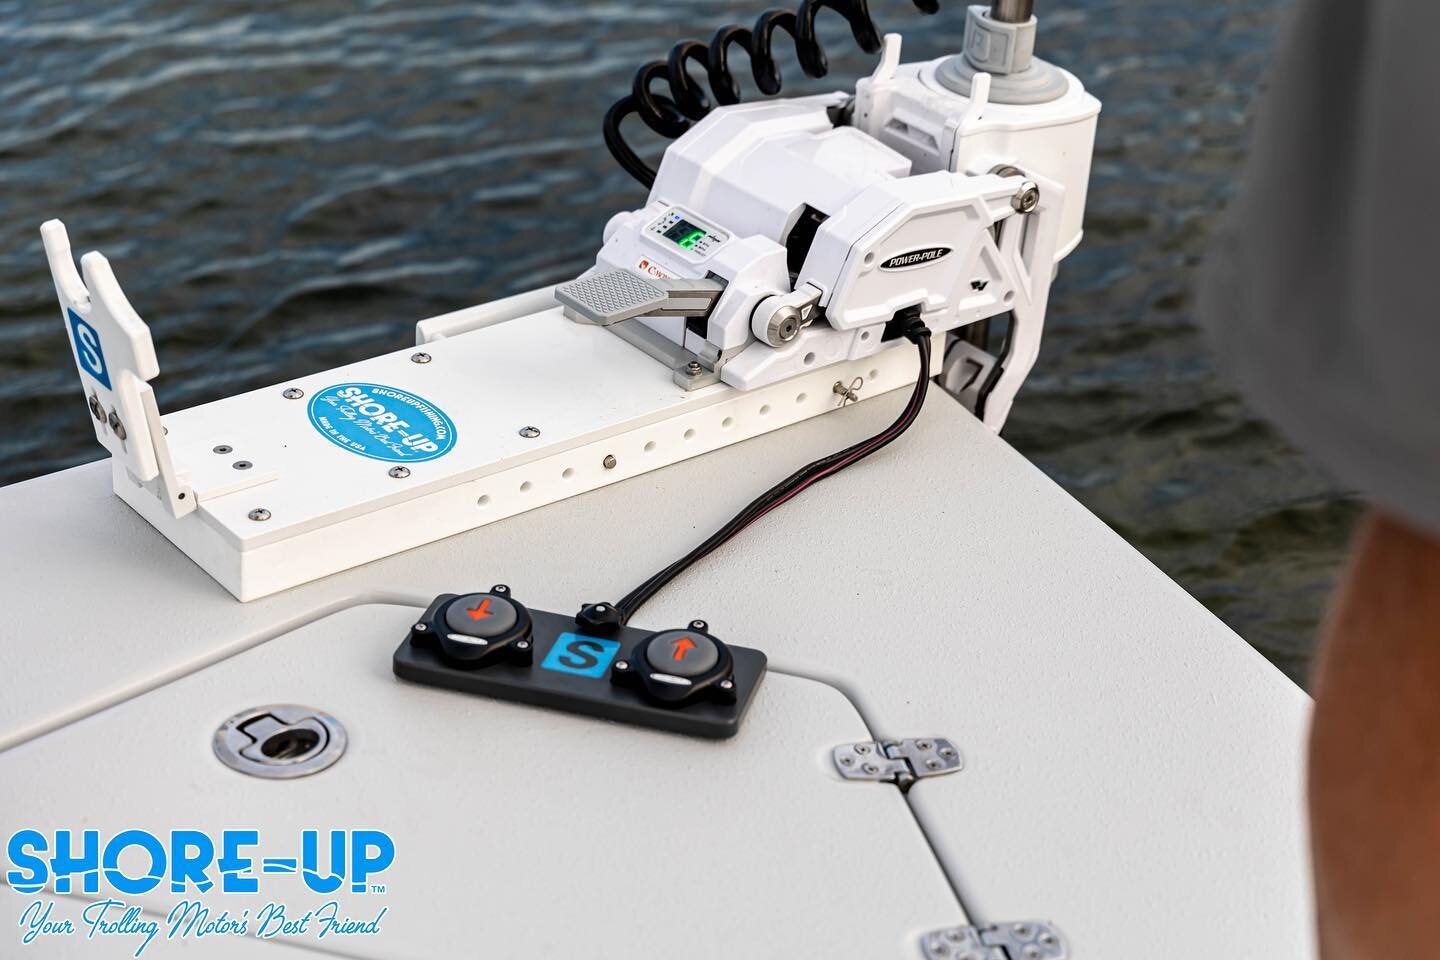 Did you know our Shore-Up mount fits the new @power.pole trolling motor?⠀
⠀
⠀
⠀
#shoreup #fishing #trollingmotor #shoreupsystems